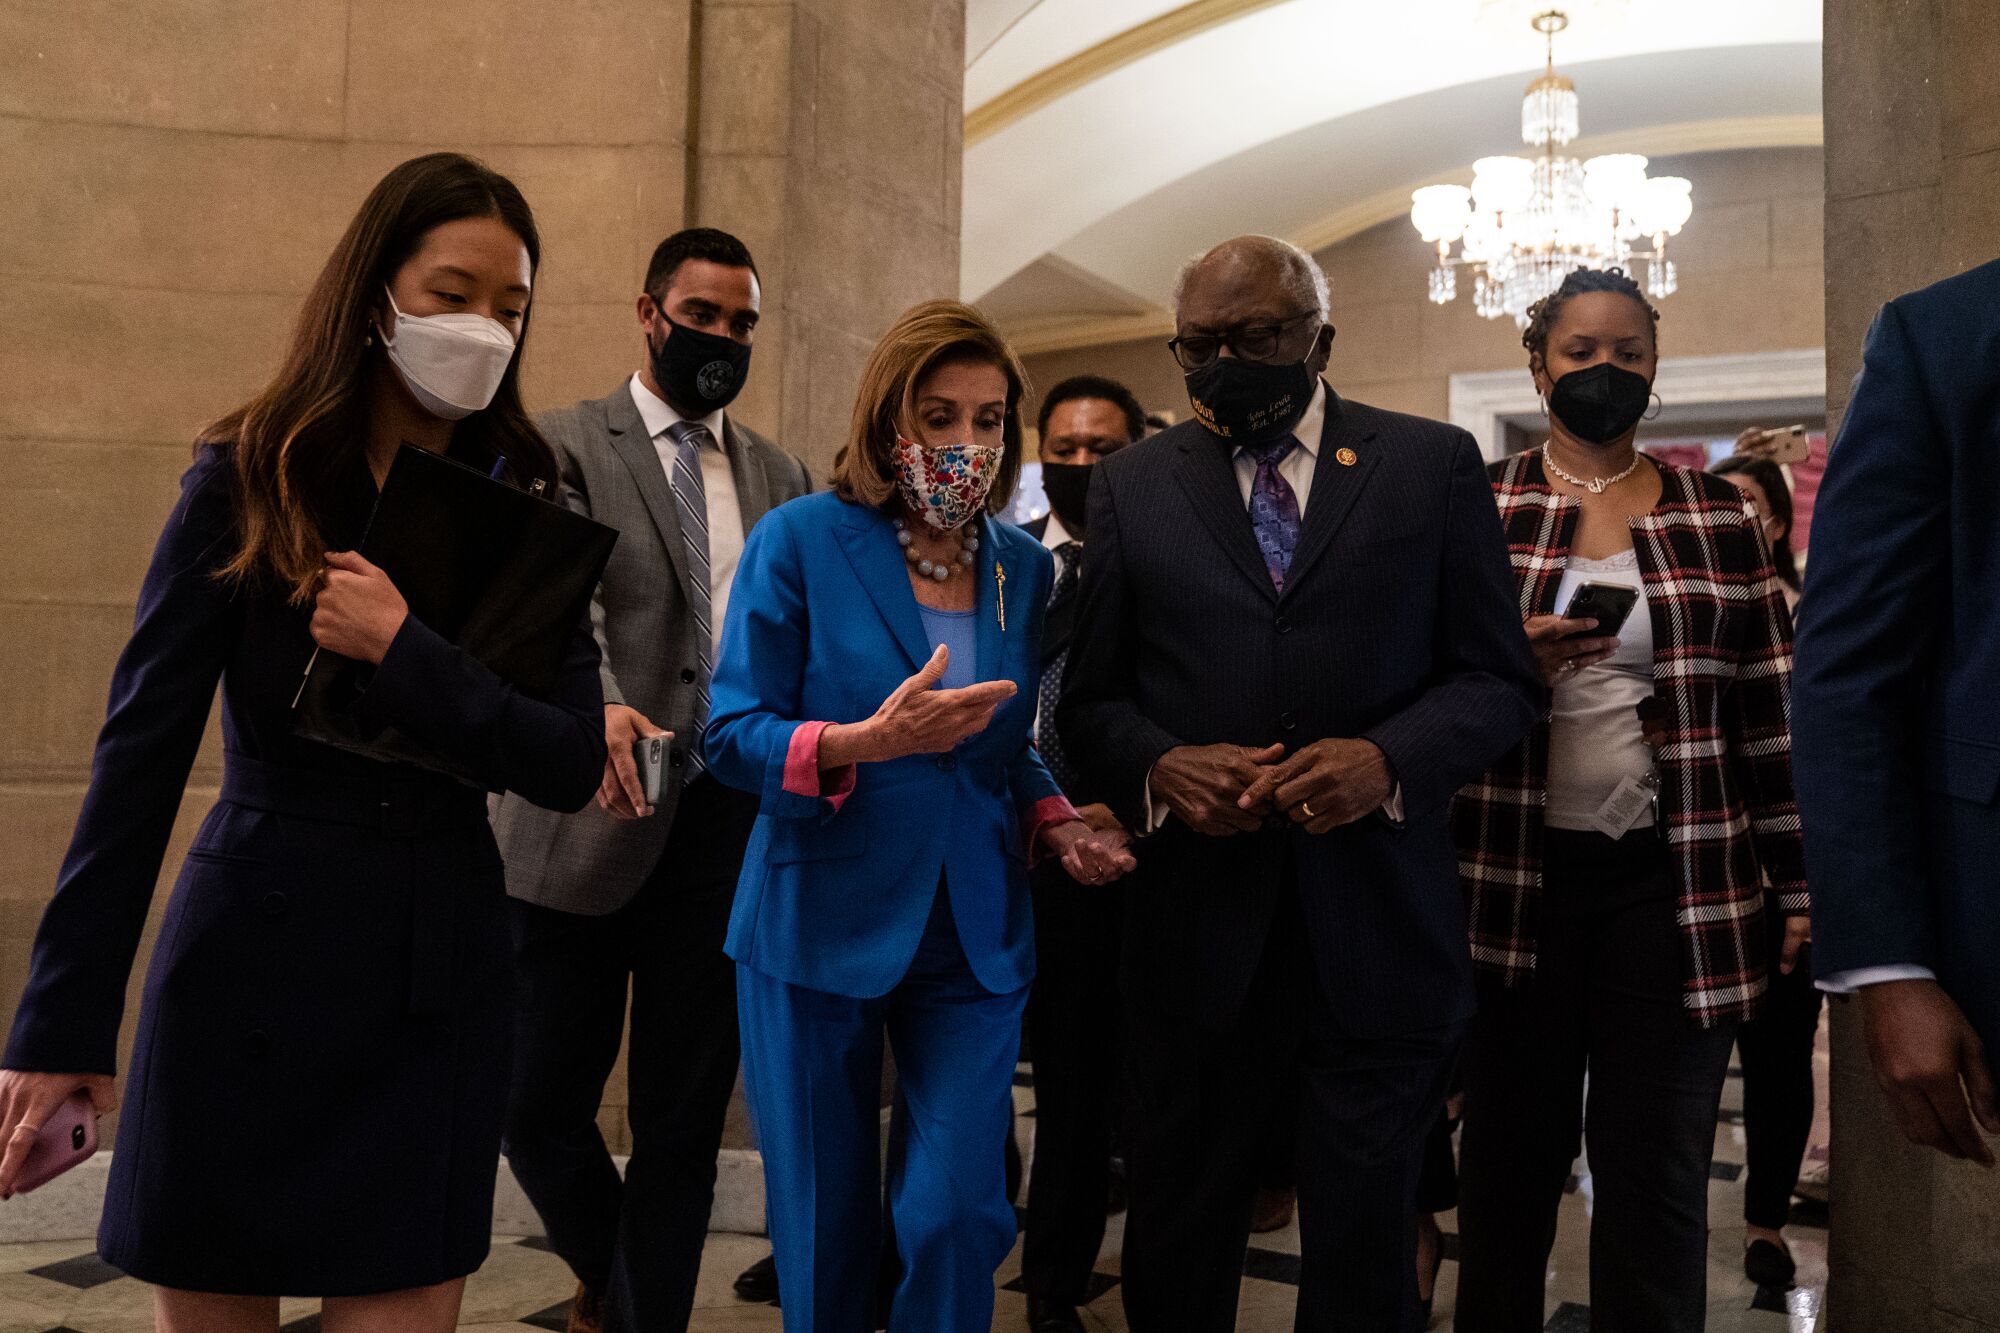 Nancy Pelosi, James Clyburn and others walk through the halls of the Capitol